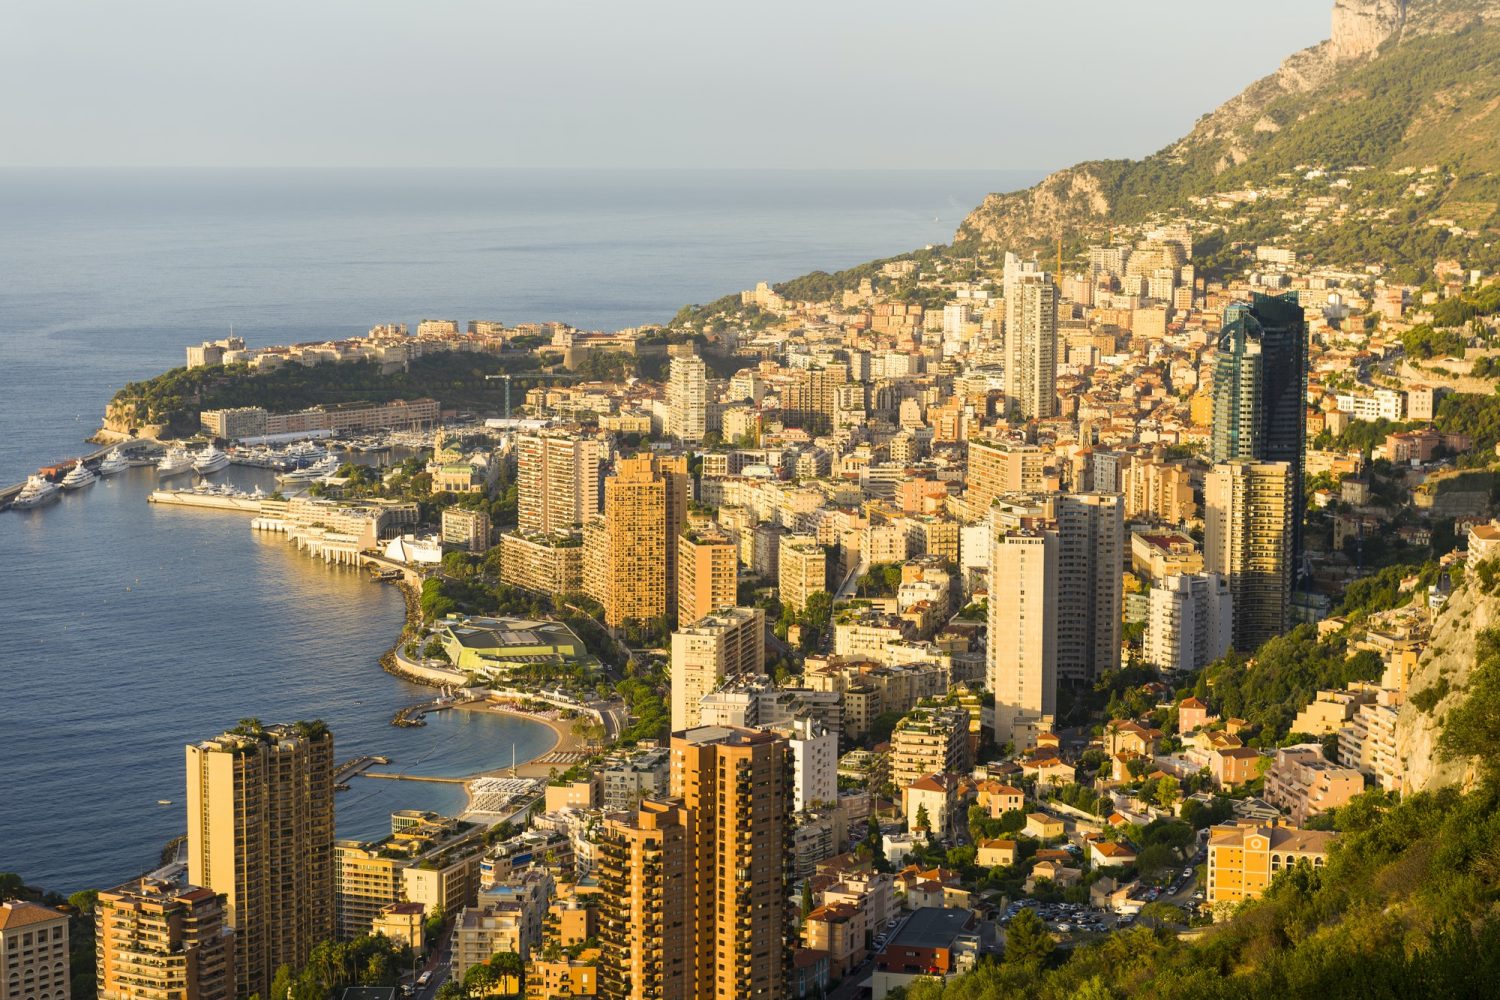 Coastal cityscape with skyscrapers and hotels, Monaco